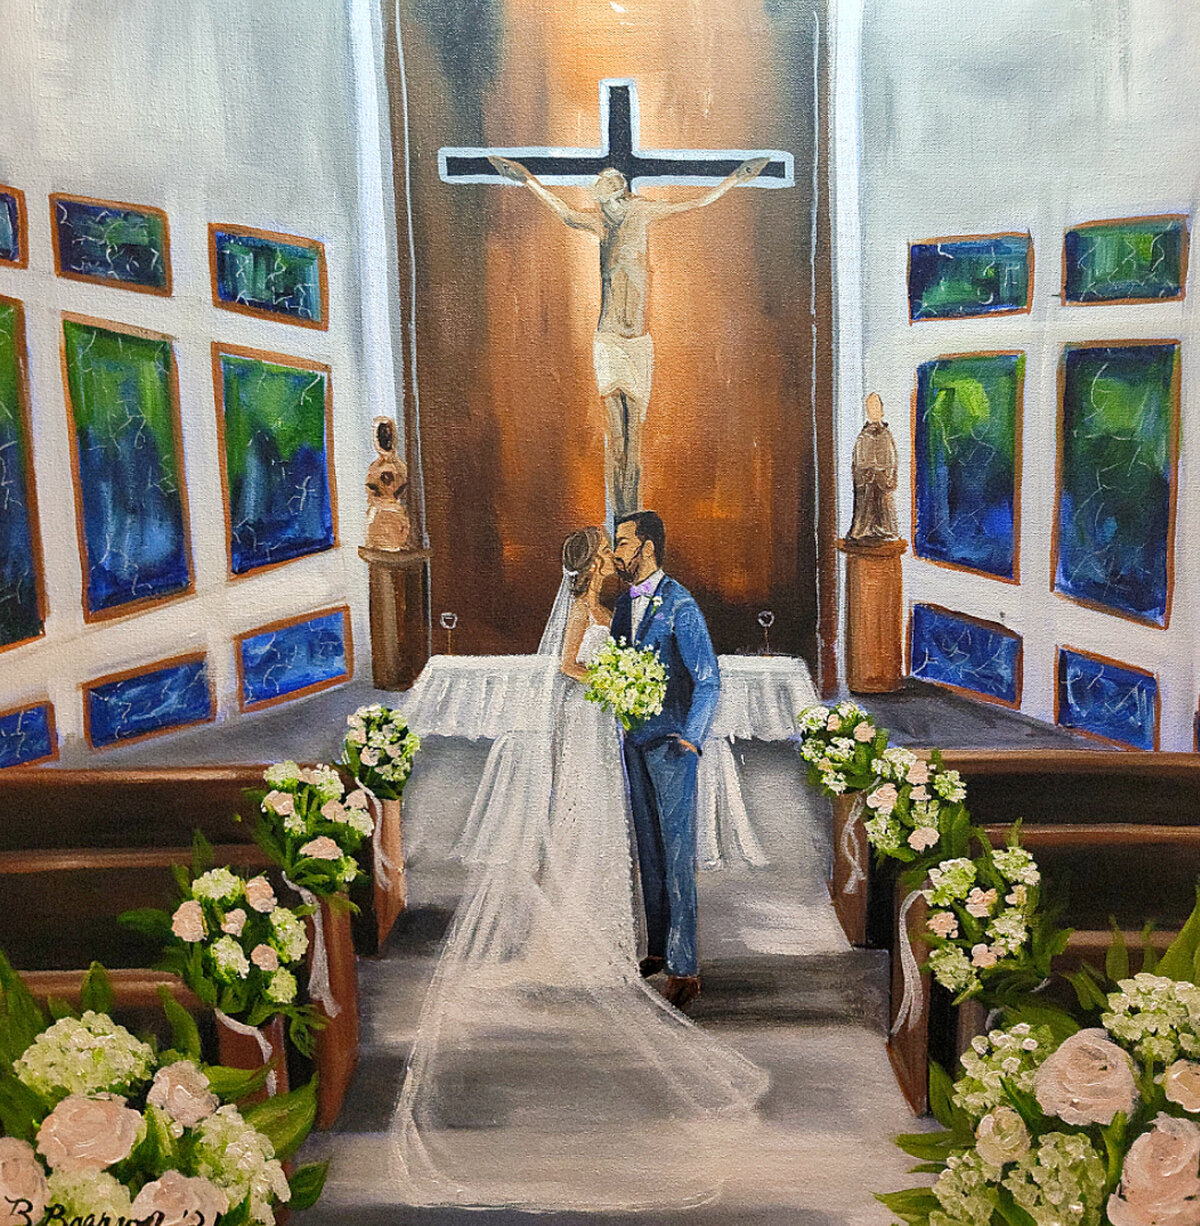 Catholic church live wedding painting in San Juan, Puerto Rico. Bride and groom share their first kiss at the altar.